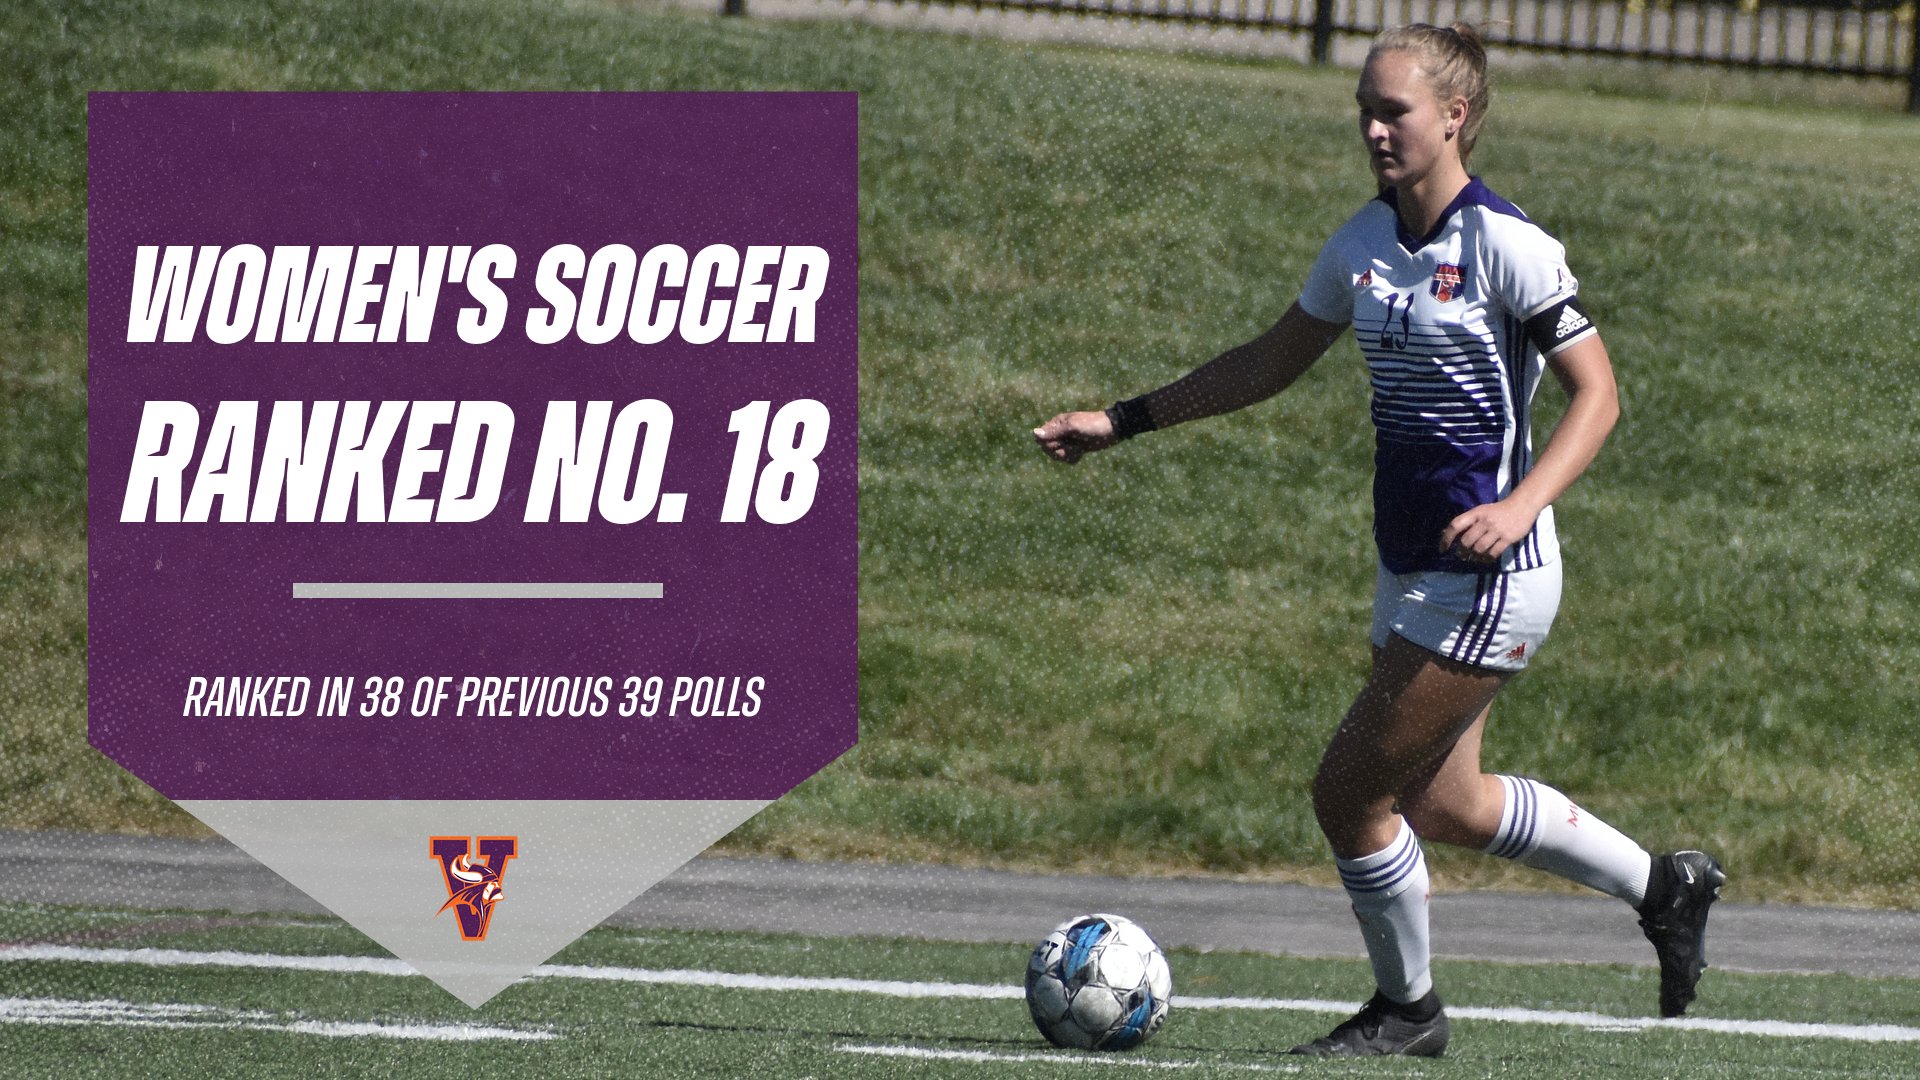 Women's Soccer Continues Climb Up Coaches' Poll Rankings